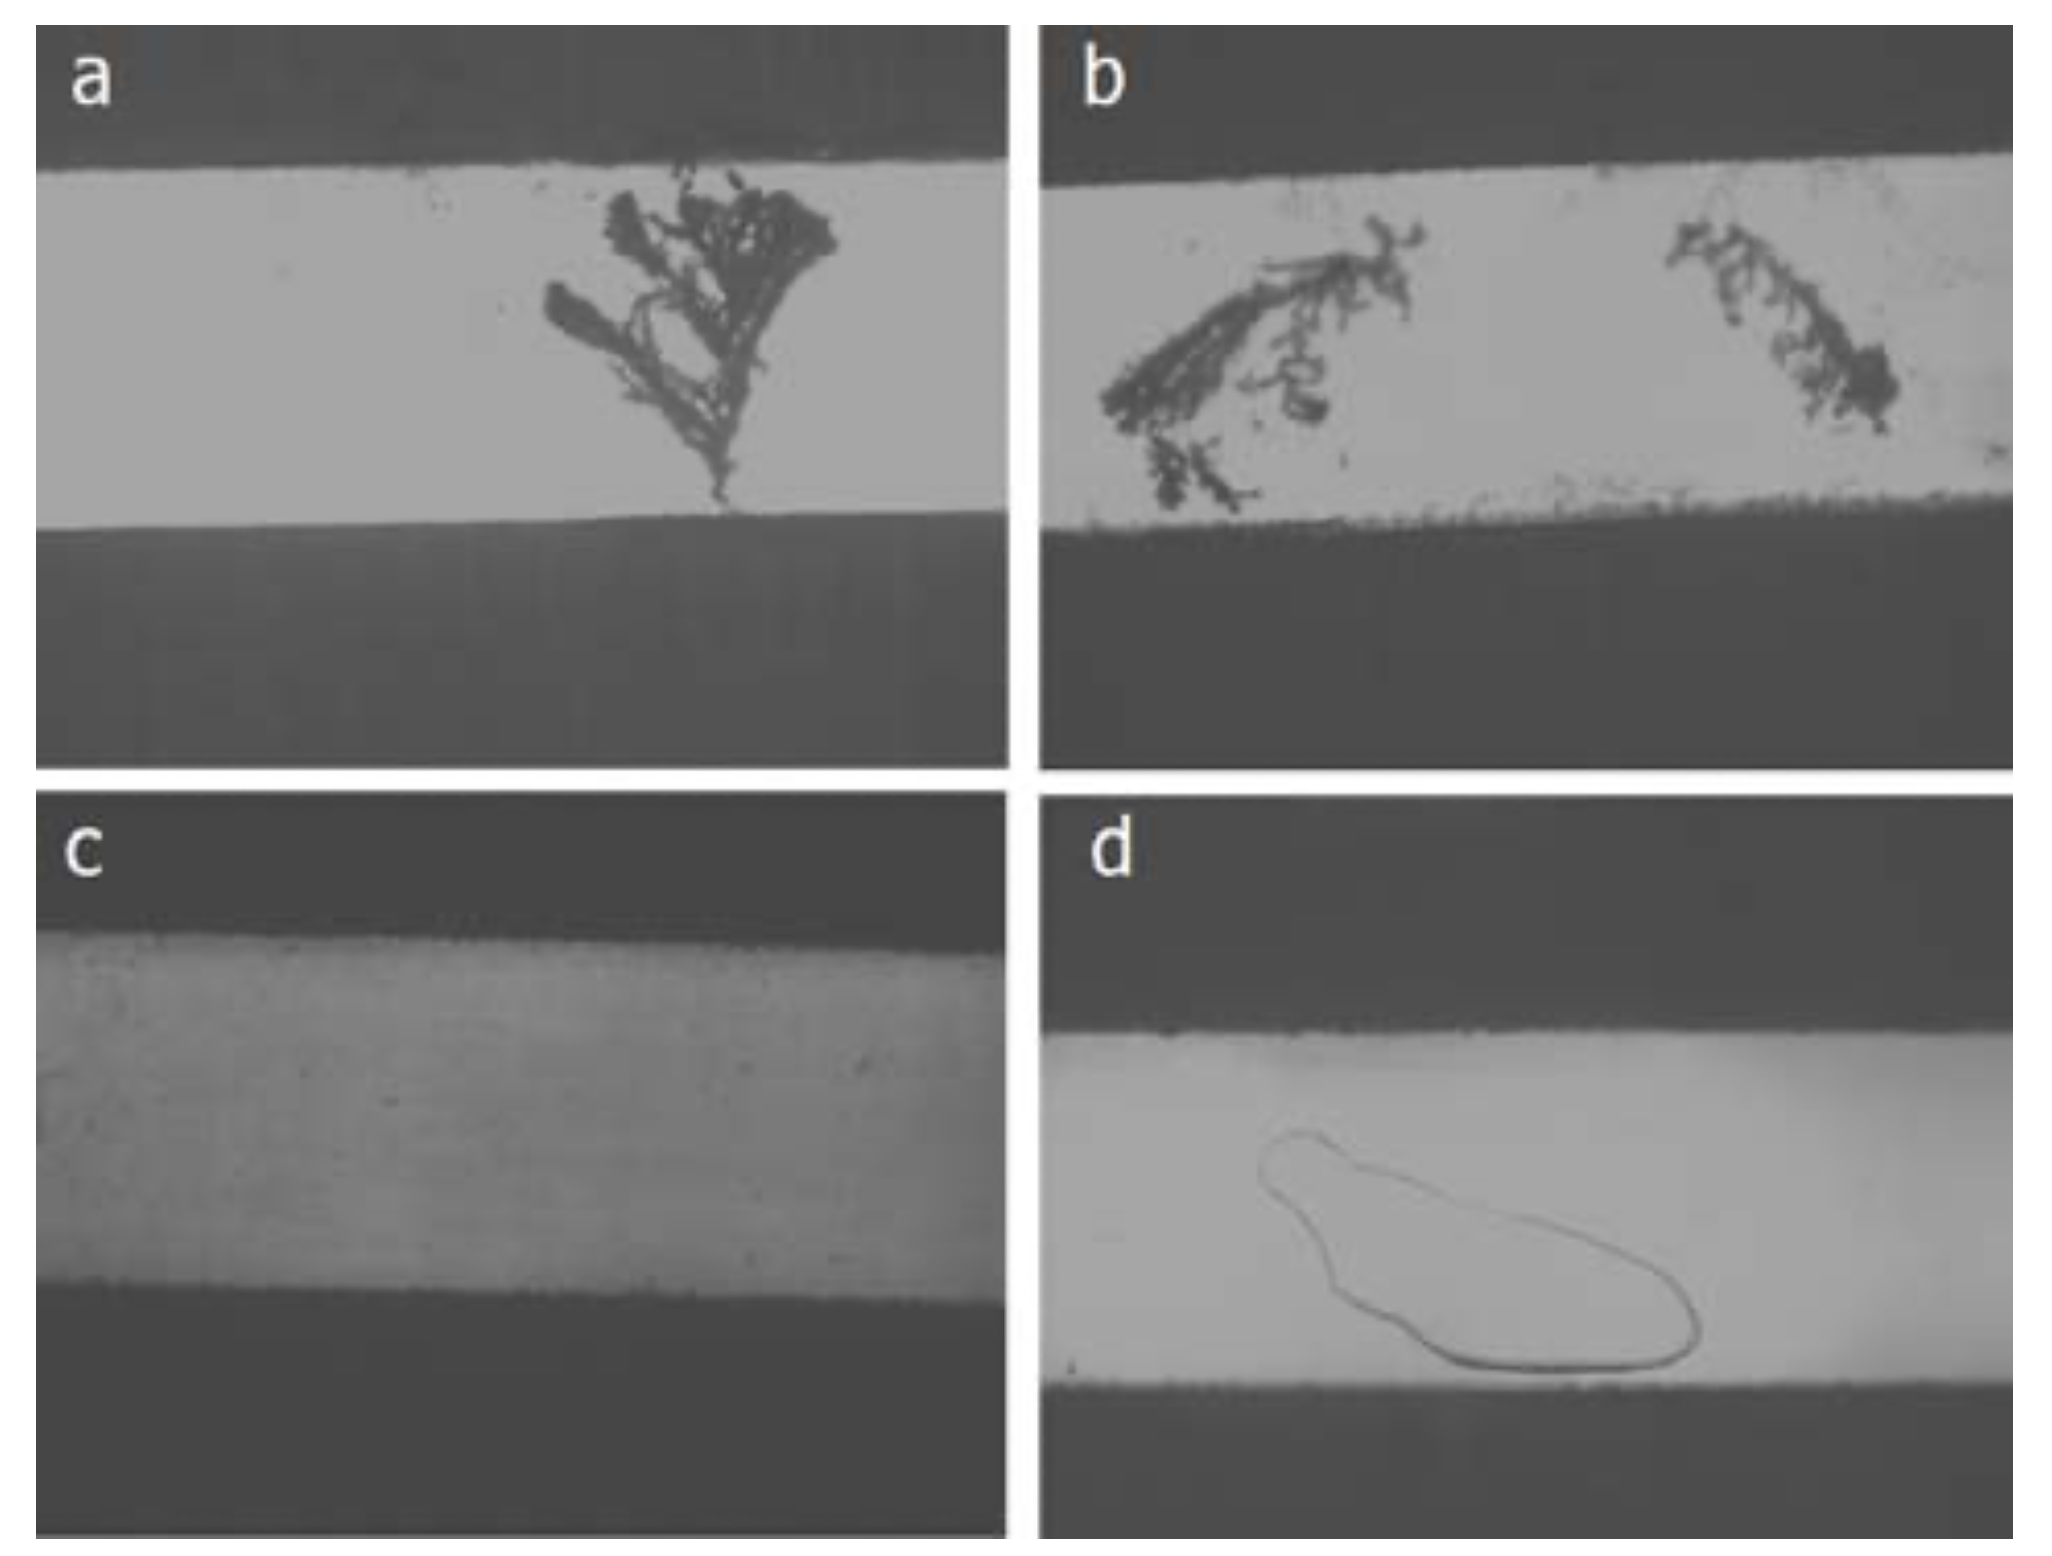 Figure 4. Dendritic growth is present in samples a and b, not present in samples c and d